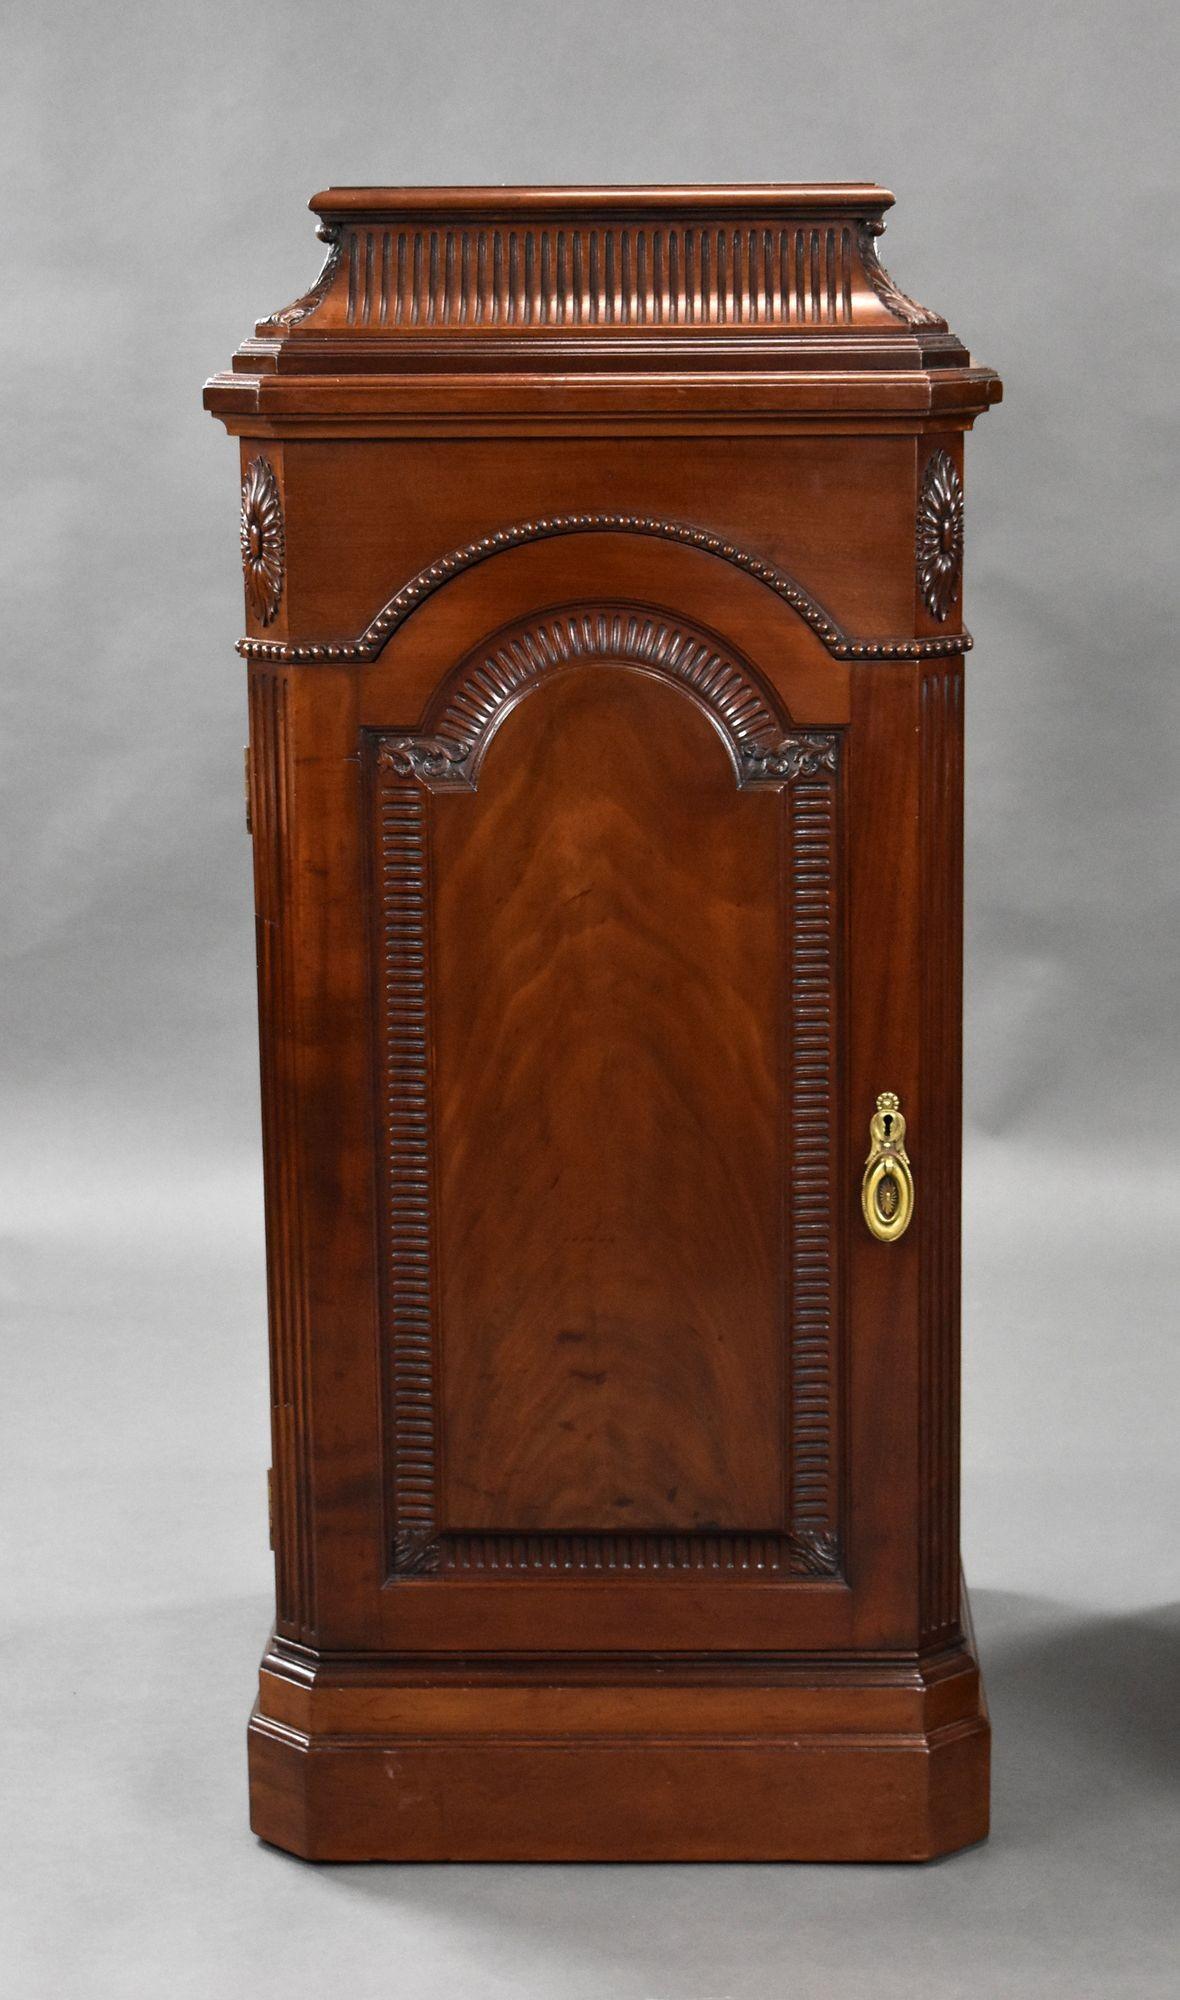 For sale is a good quality pair of 19th century solid mahogany pedestals, each having a paneled cupboard door, opening to sliding trays in one, and a single shelf in the other. Both pedestals stand on a plinth base and are in excellent condition for